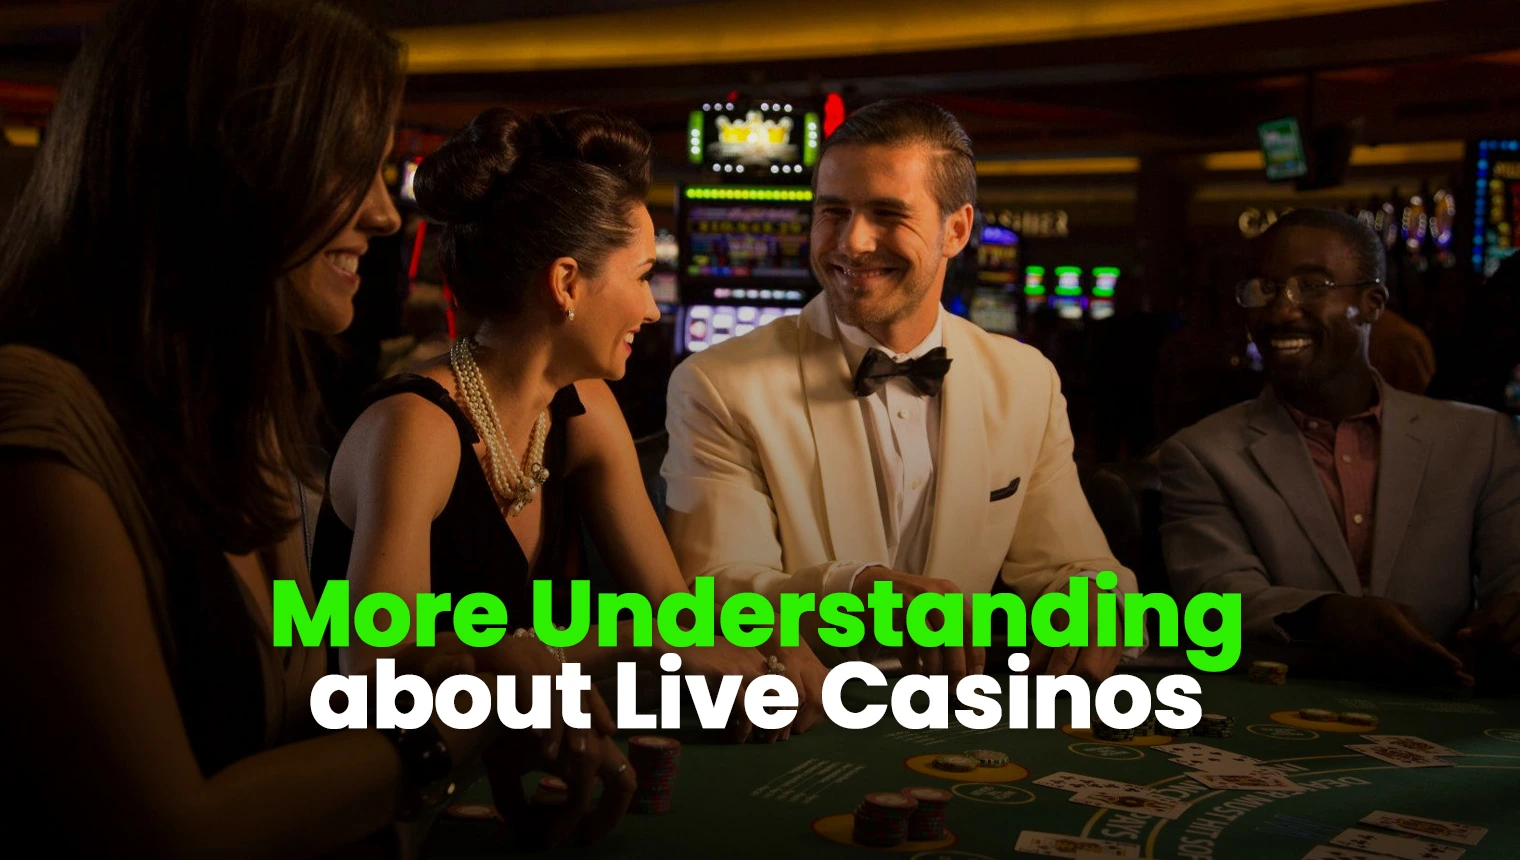 More Understanding about Live Casinos